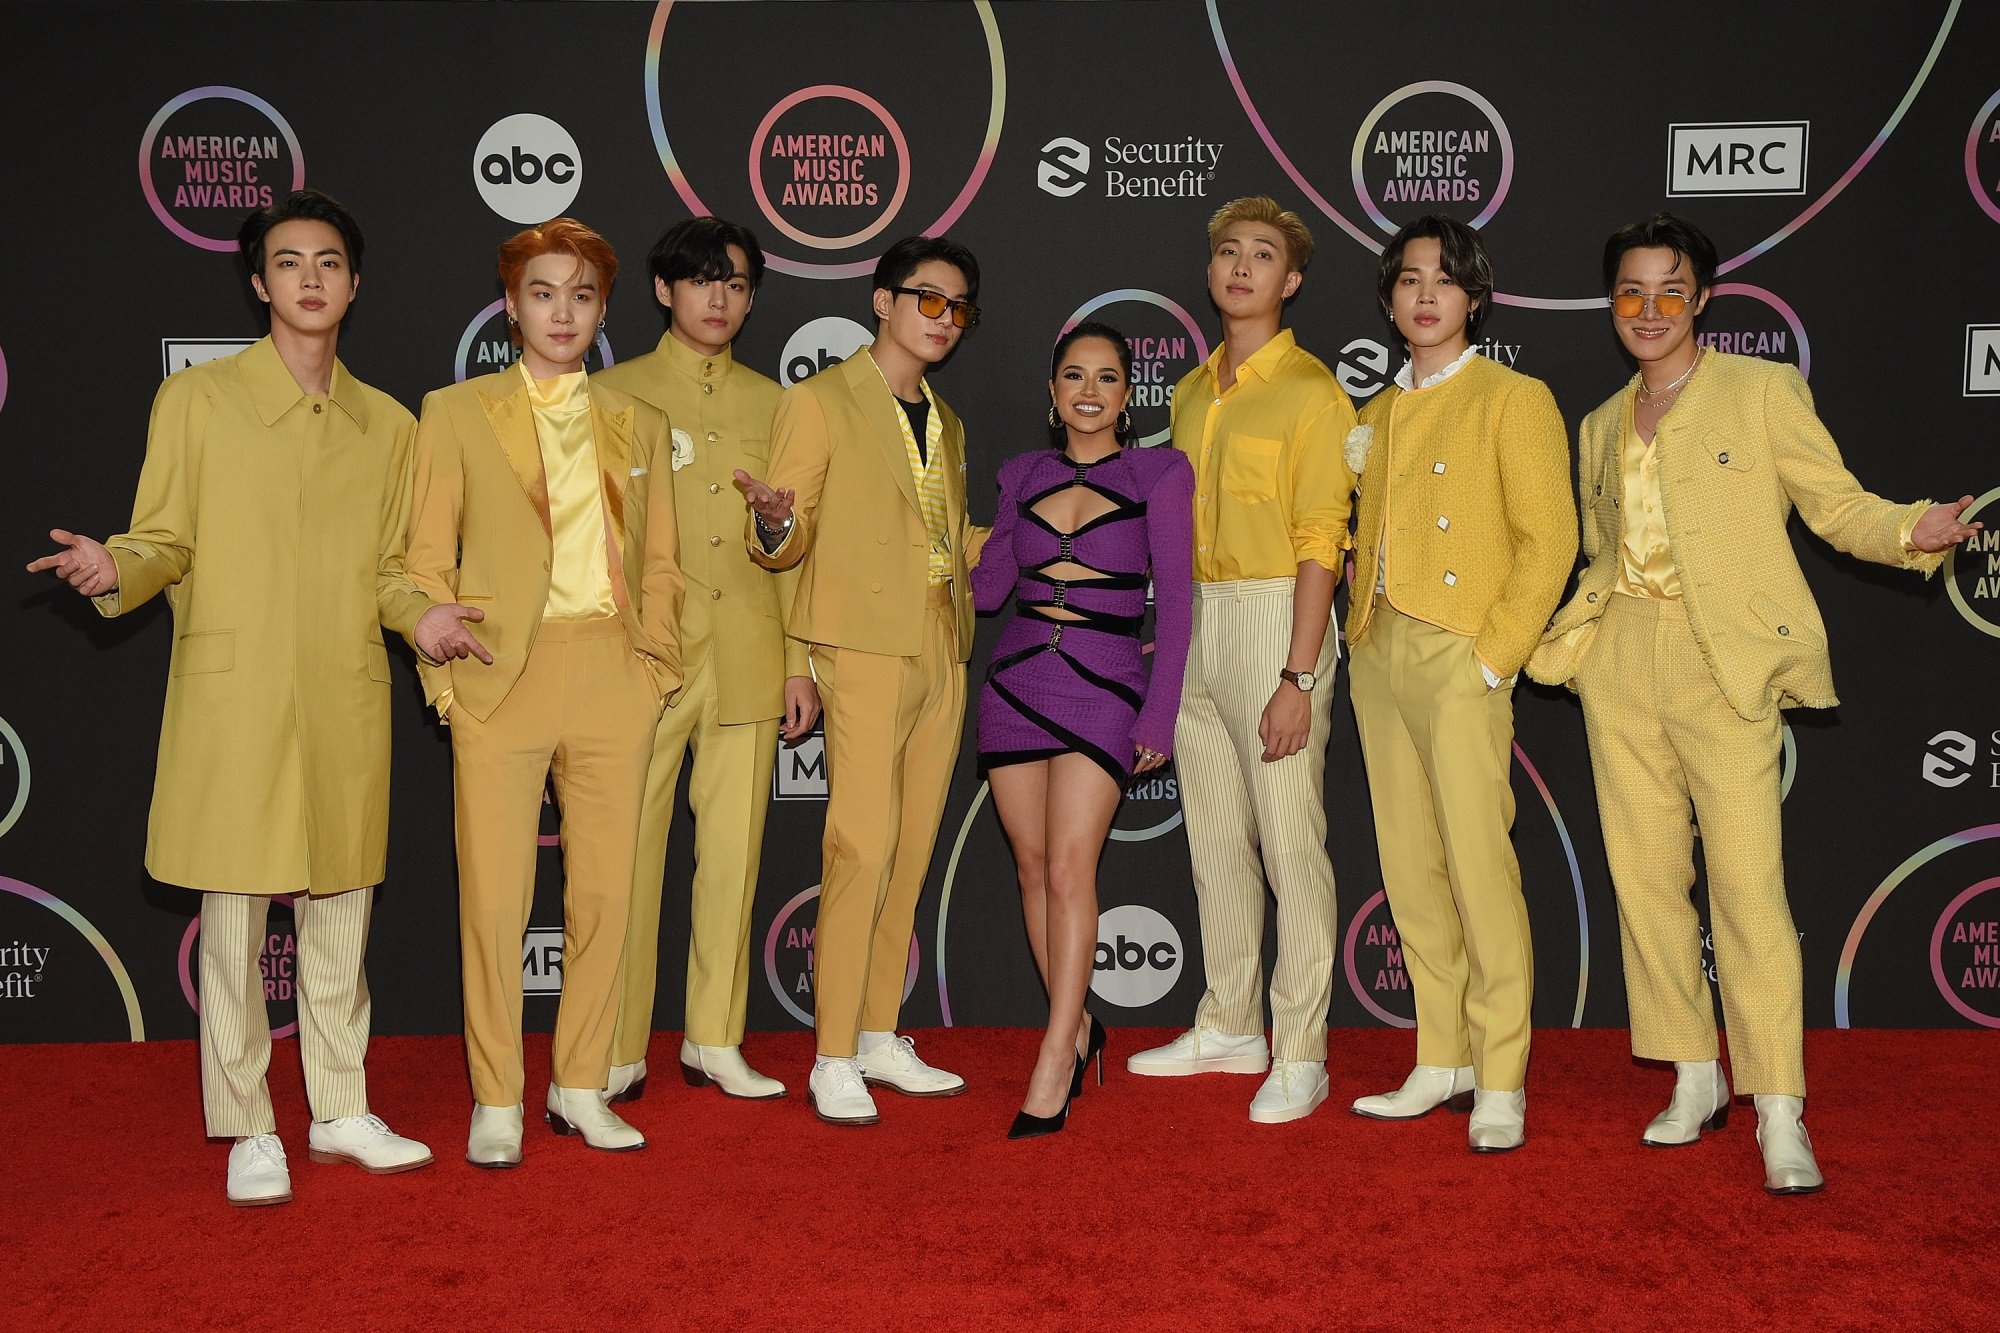 The members of BTS and Becky G pose together at the 2021 American Music Awards